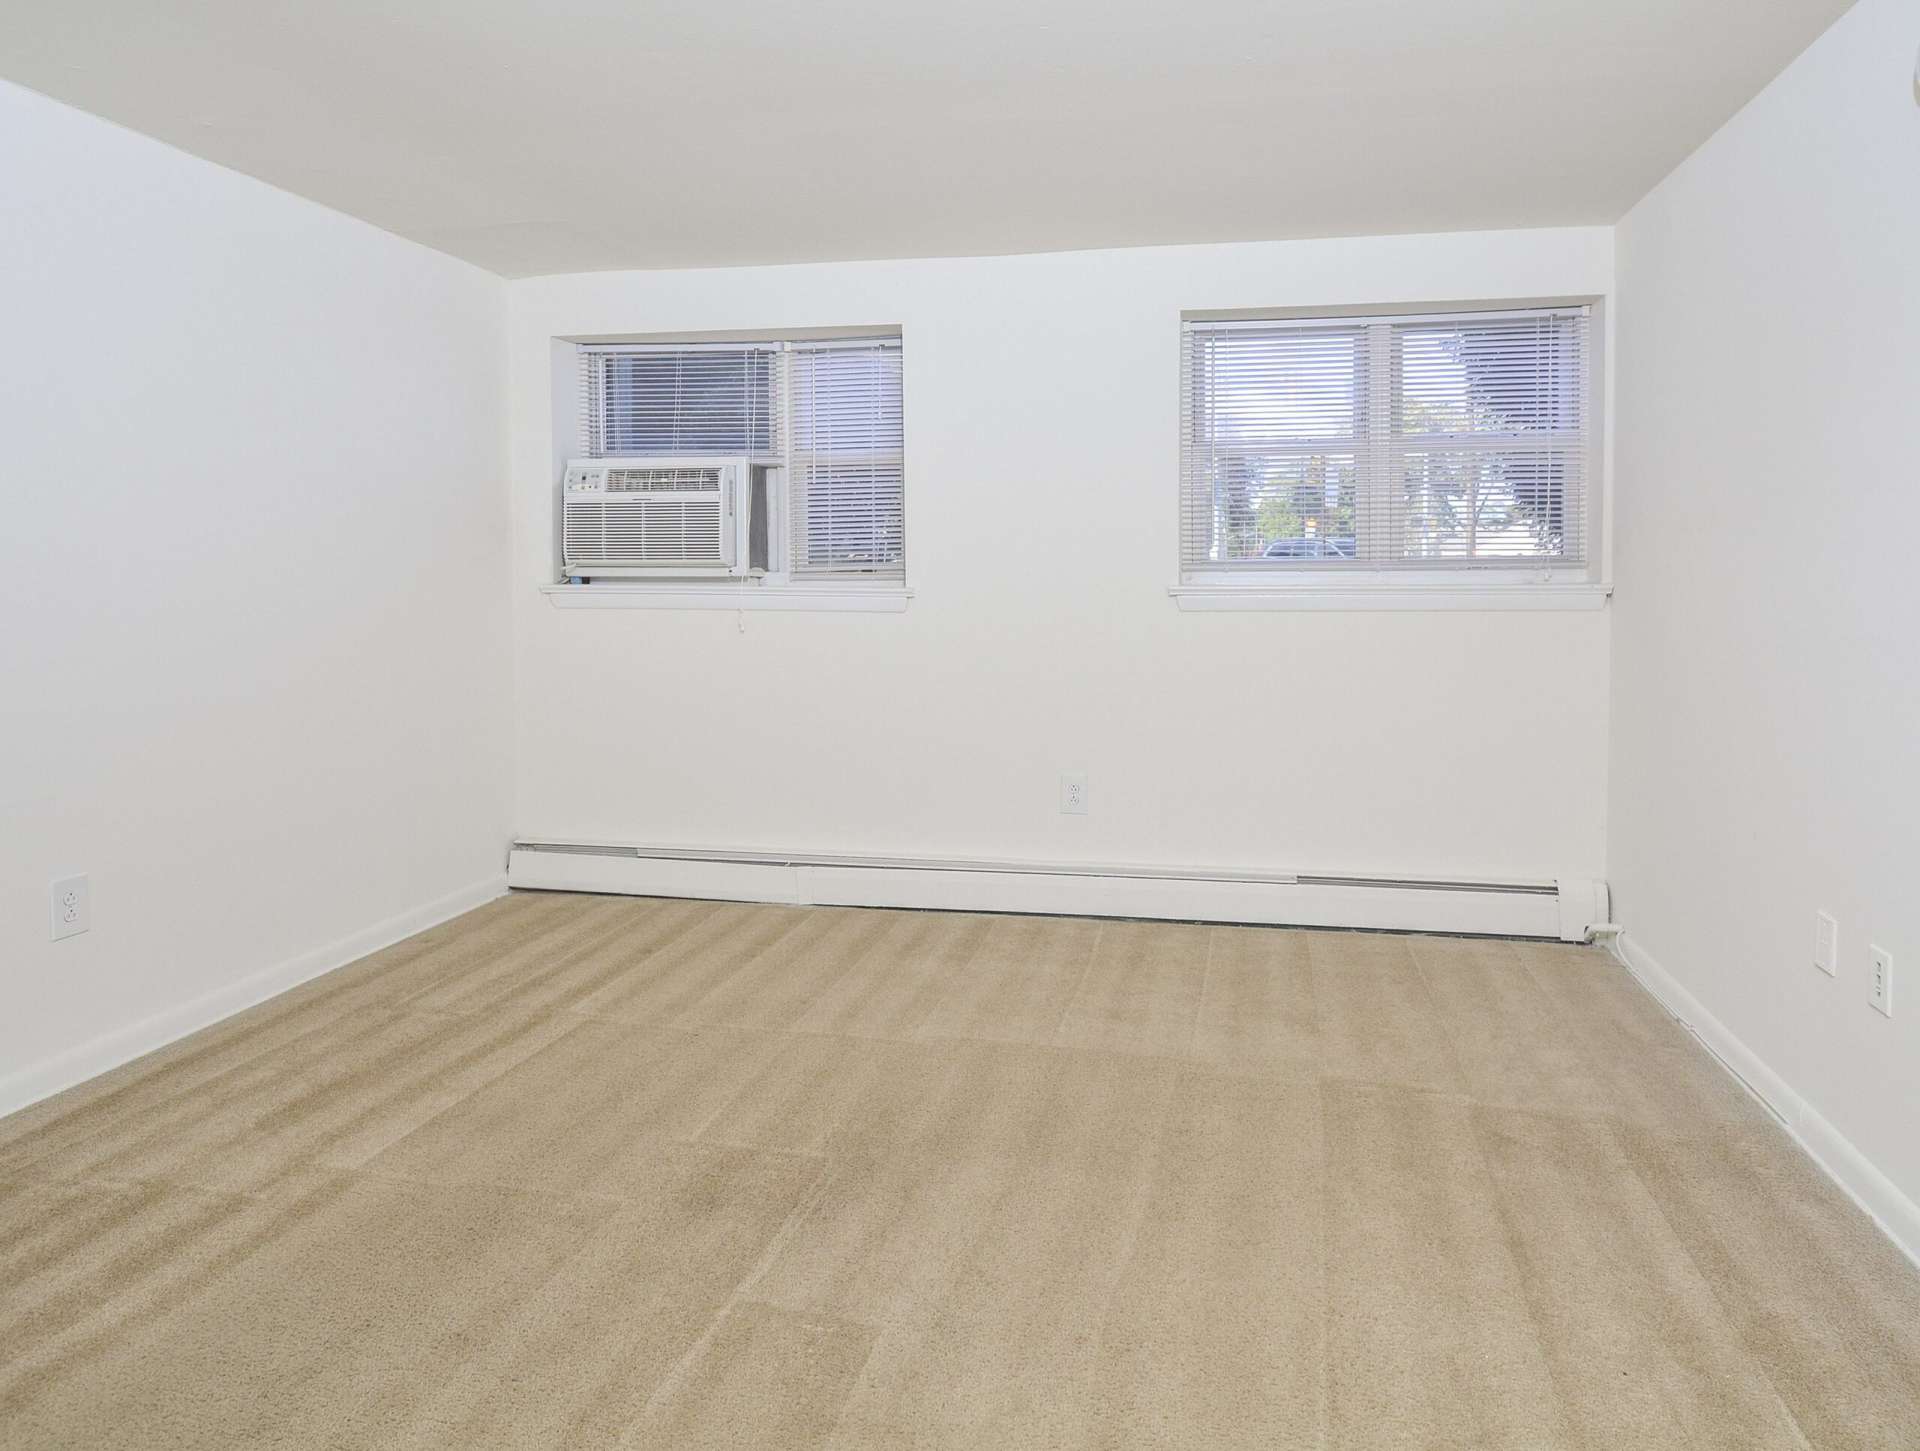 Bedroom with beige carpets, 2 windows, and white walls at Knollwood Apartments.